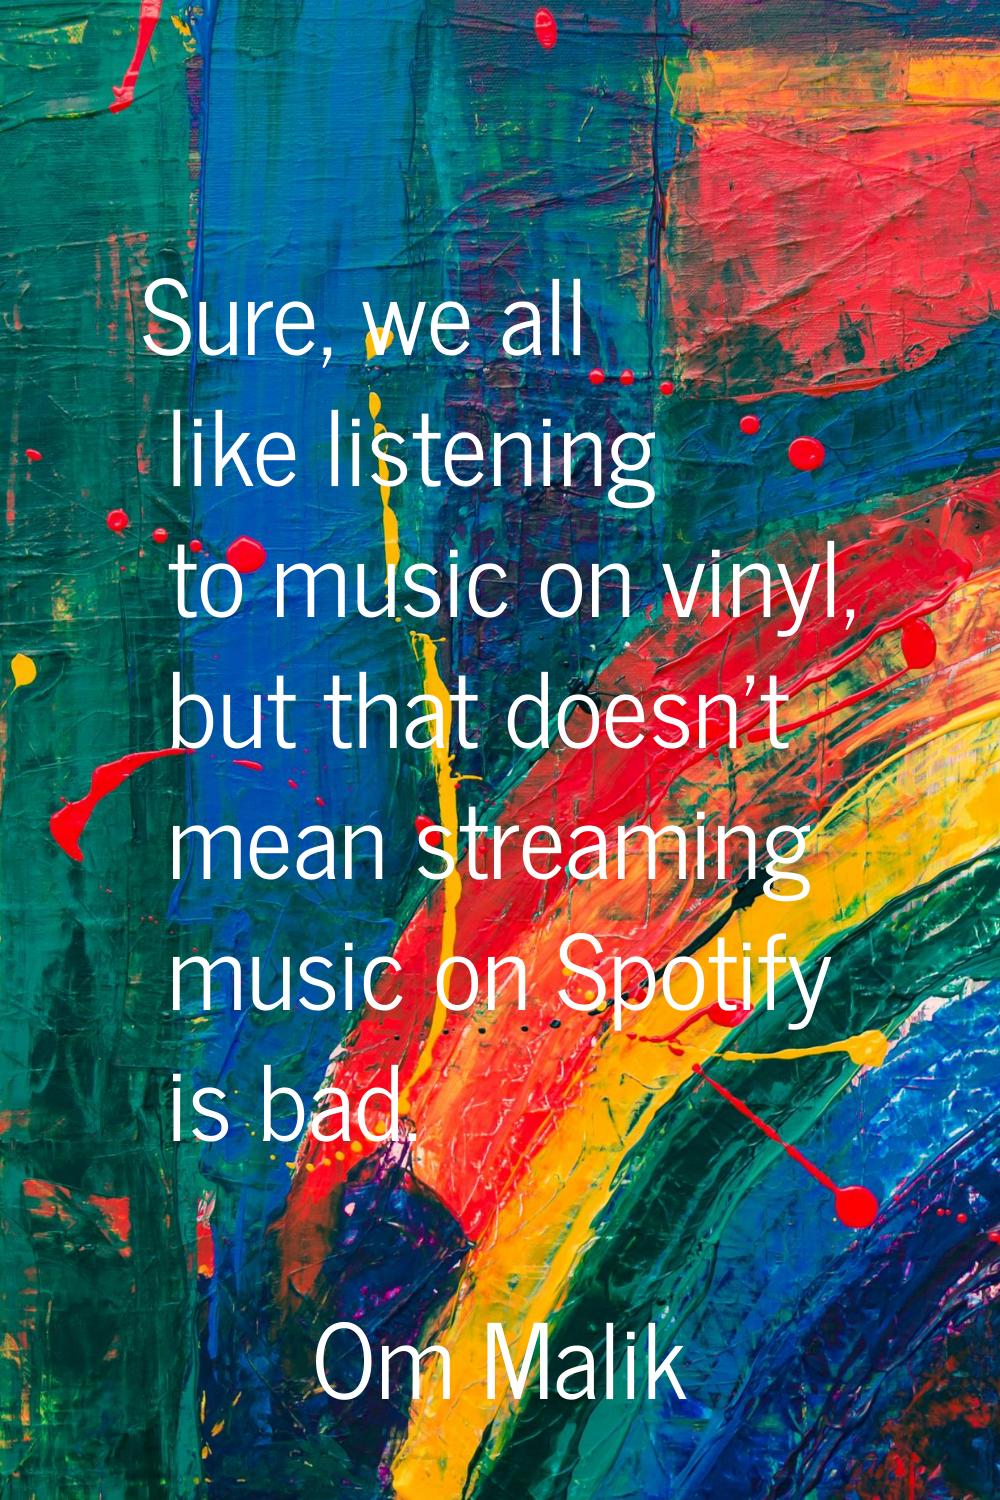 Sure, we all like listening to music on vinyl, but that doesn't mean streaming music on Spotify is 